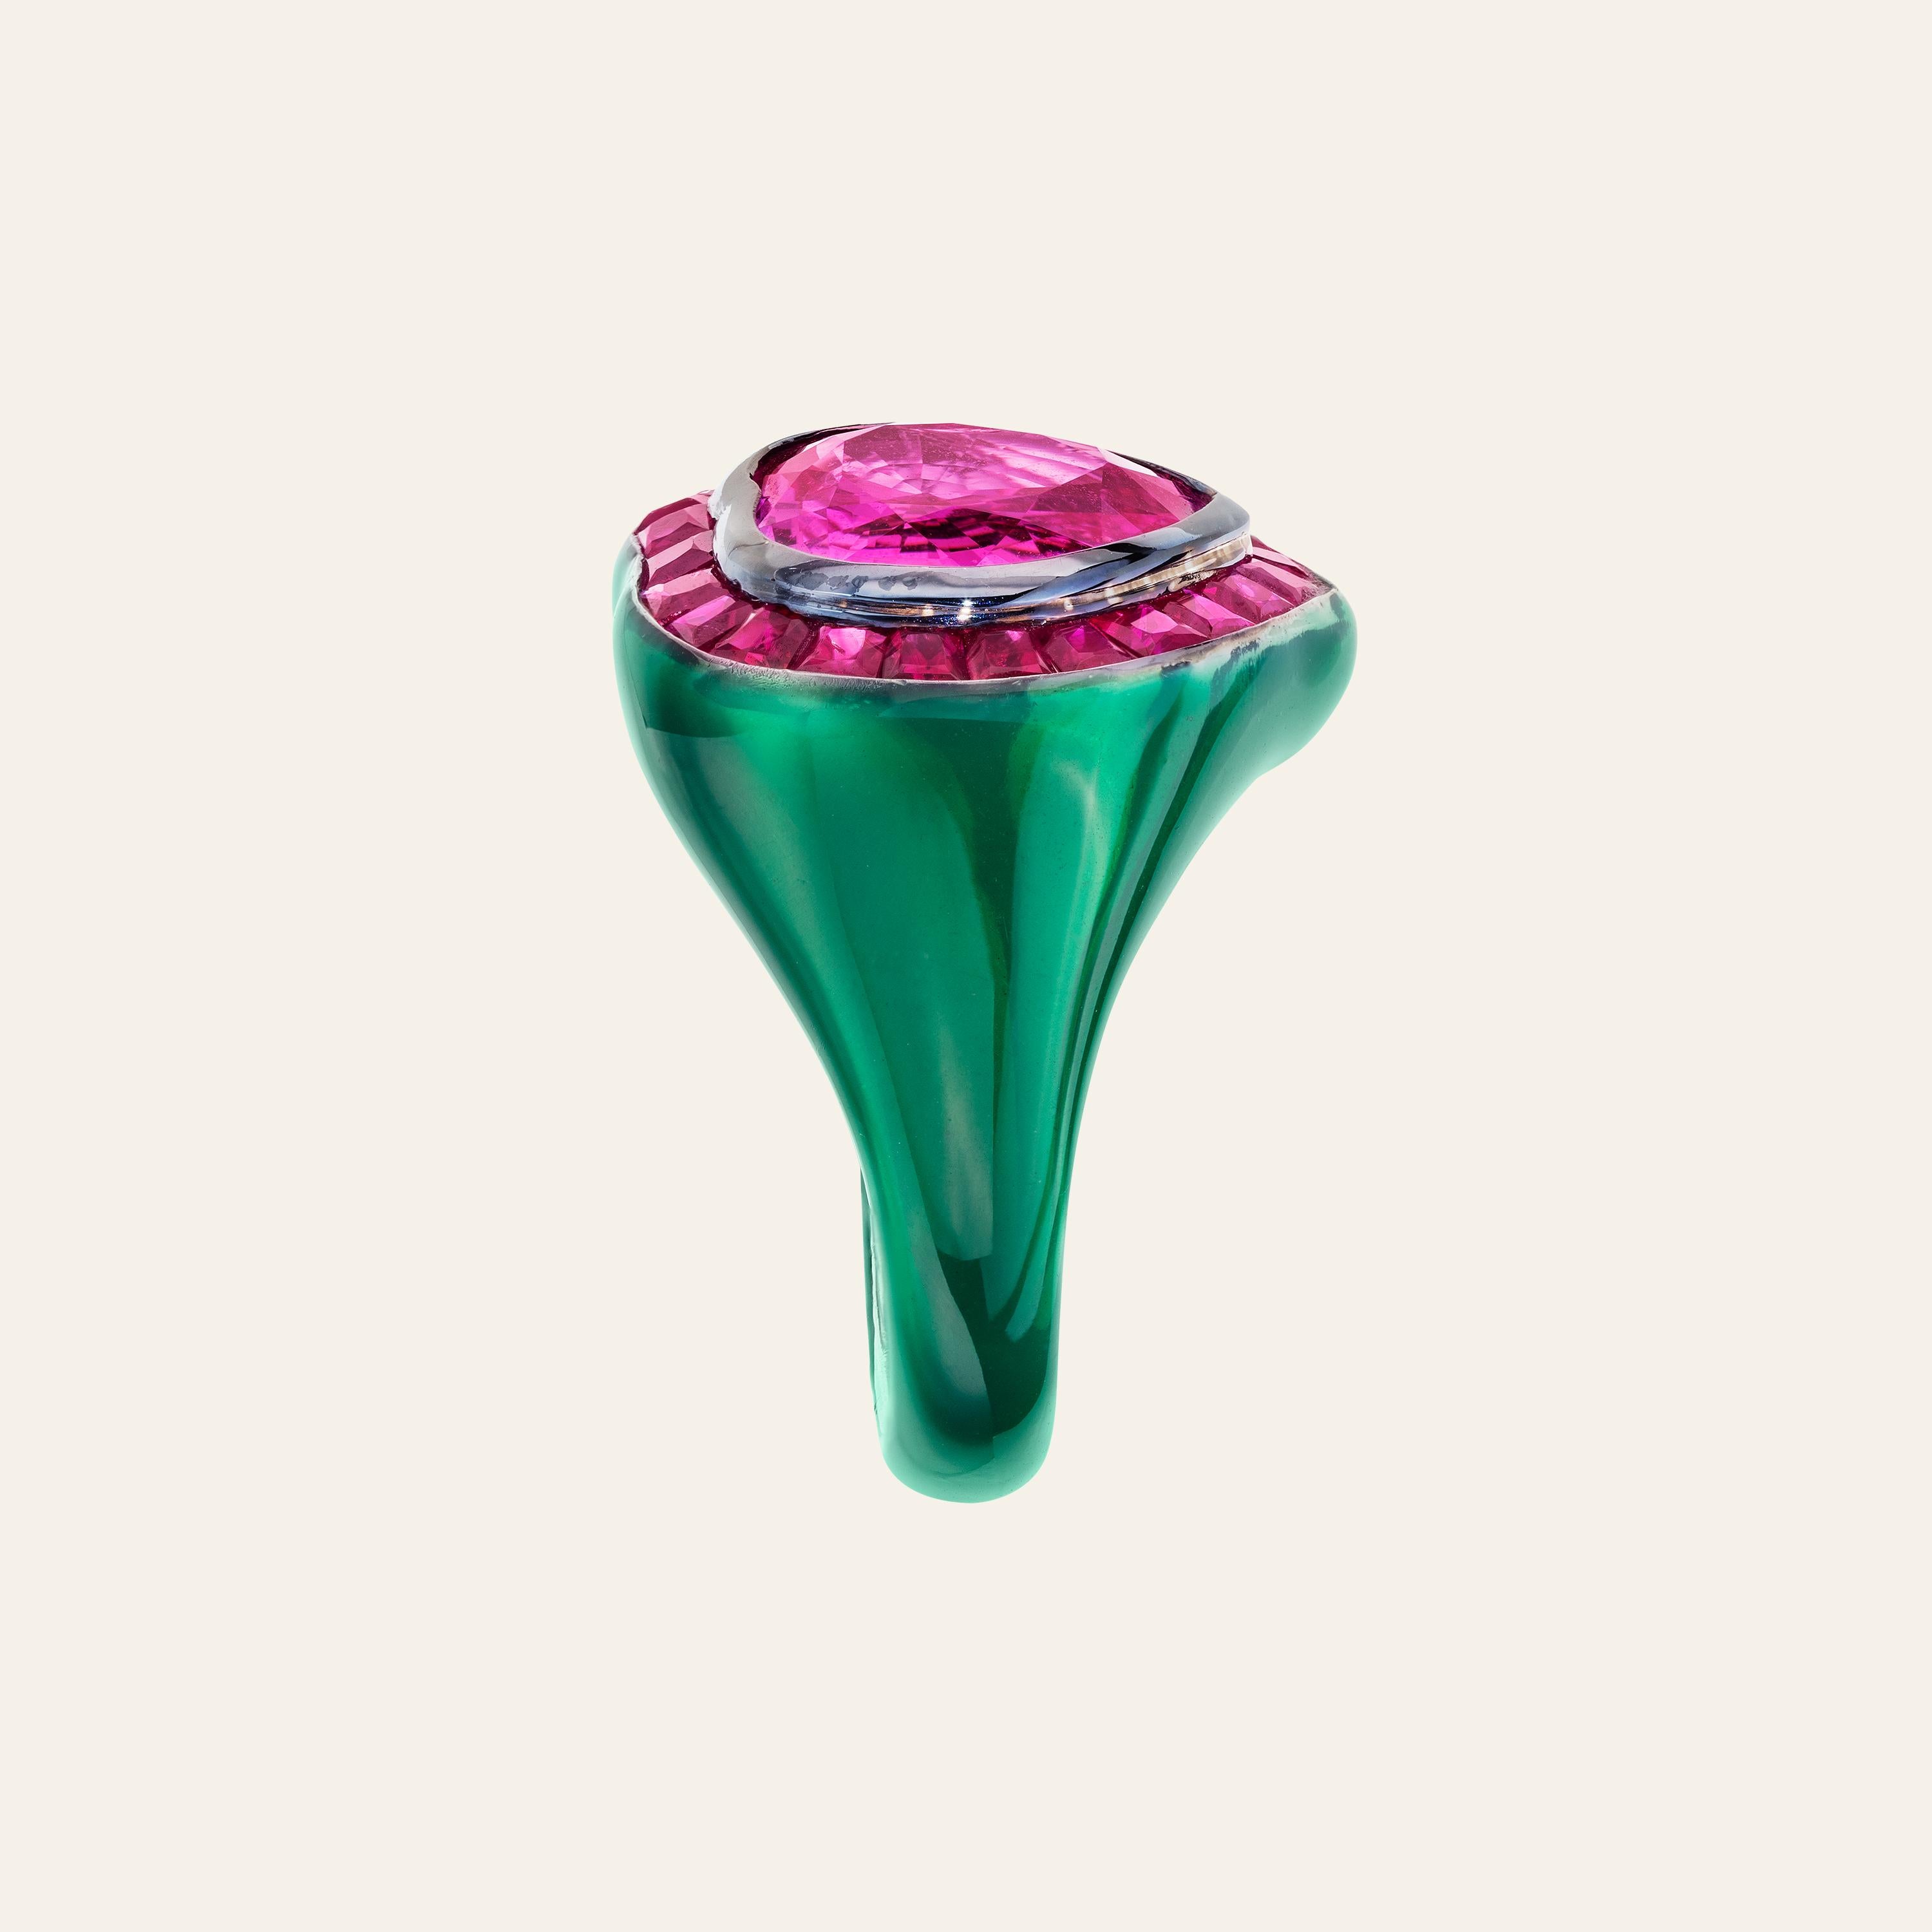 Sabbadini Heart Shaped Pink Sapphire Ring
18k White gold ring, heartshaped pink sapphire 6,03ct, square cut rubies 1,79ct, green lacquer coat Gold 16,40g
European Size 12
US Size 6 
Can be fitte to required size
Handmade & designed in Milan, in Via